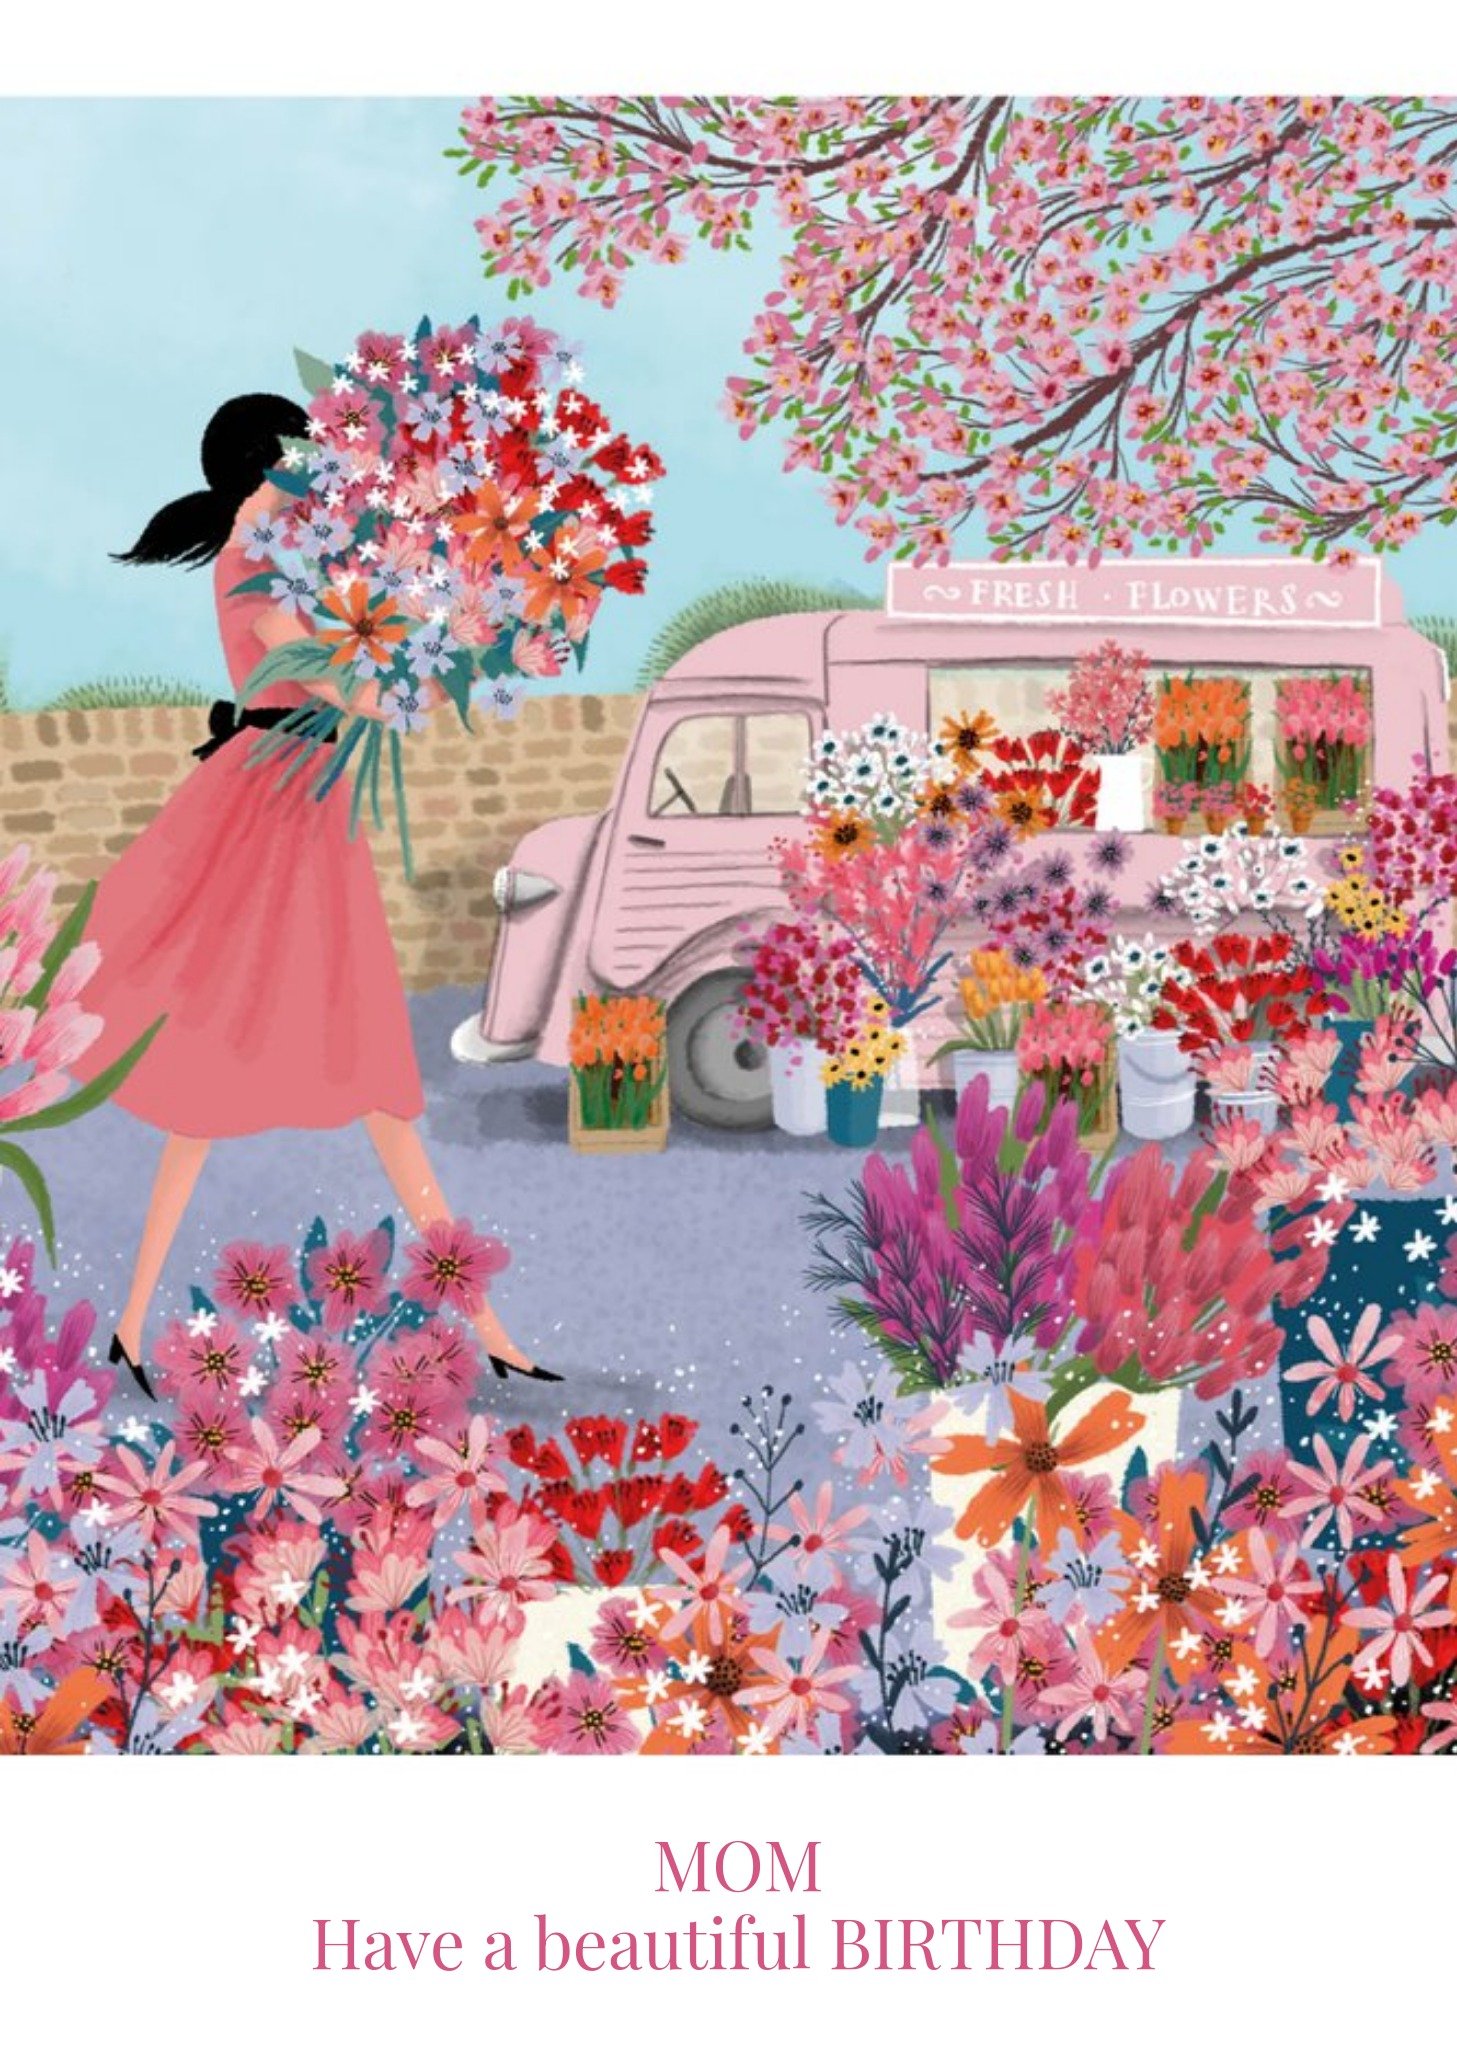 Moonpig Beautiful Illustration Of A Lady Buying A Bouquet Of Flowers From A Pink Florist Van Birthda